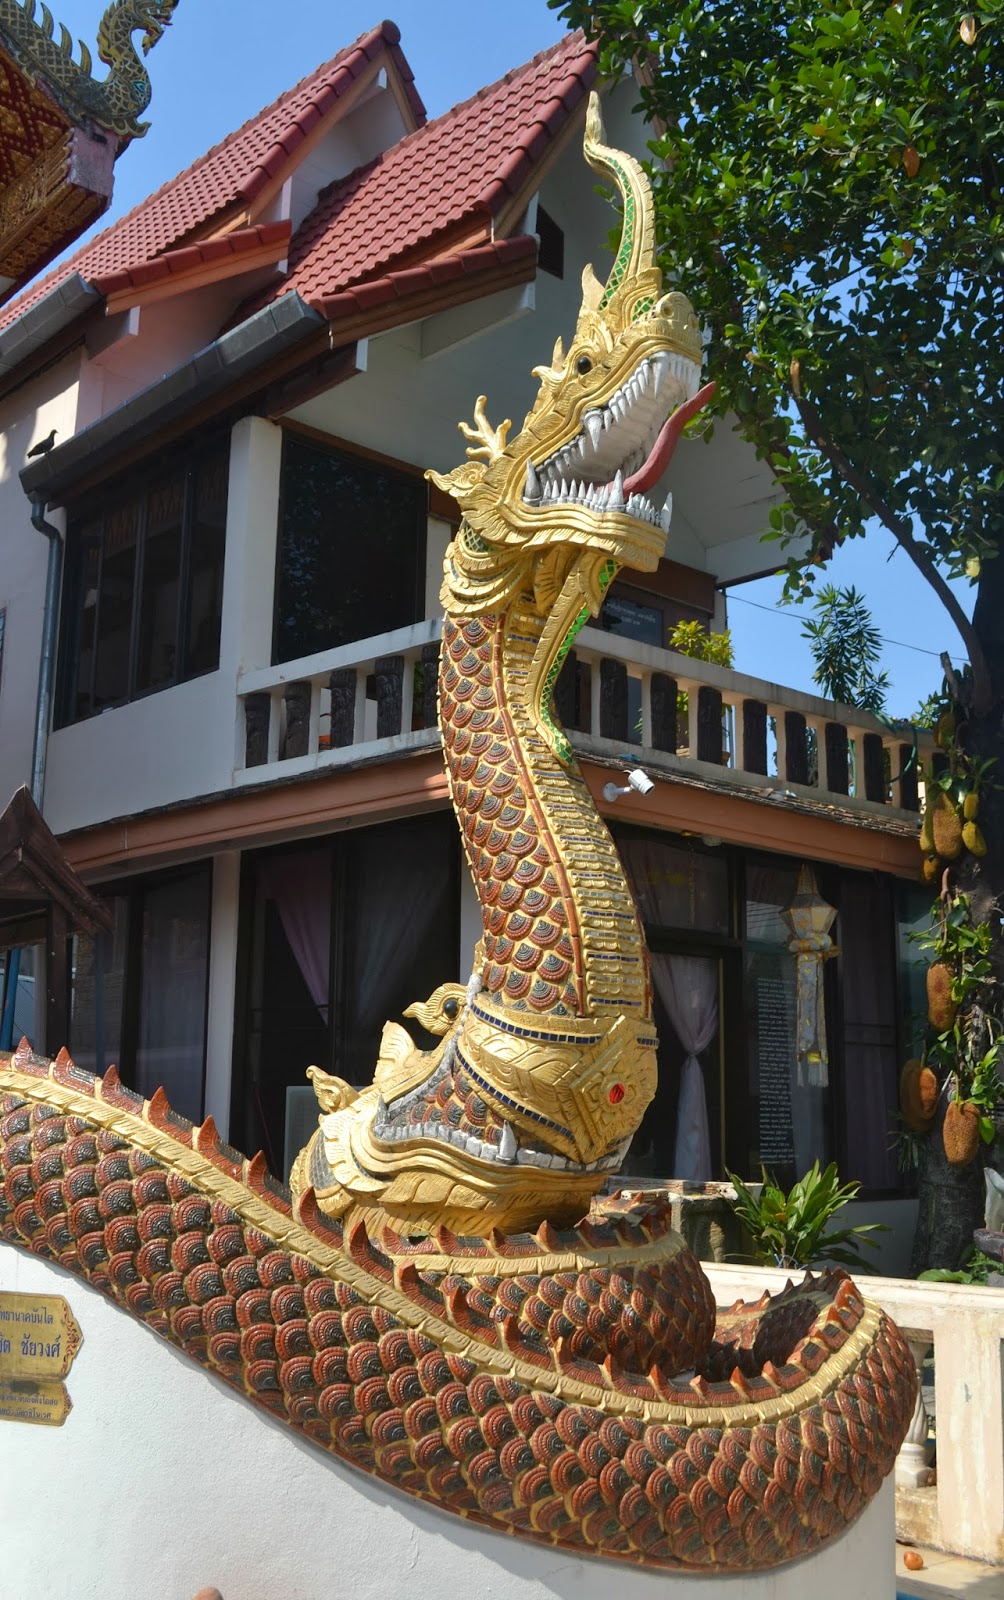 We Are Not Lost Blog: Top Seven Things To Do In Chiang Mai